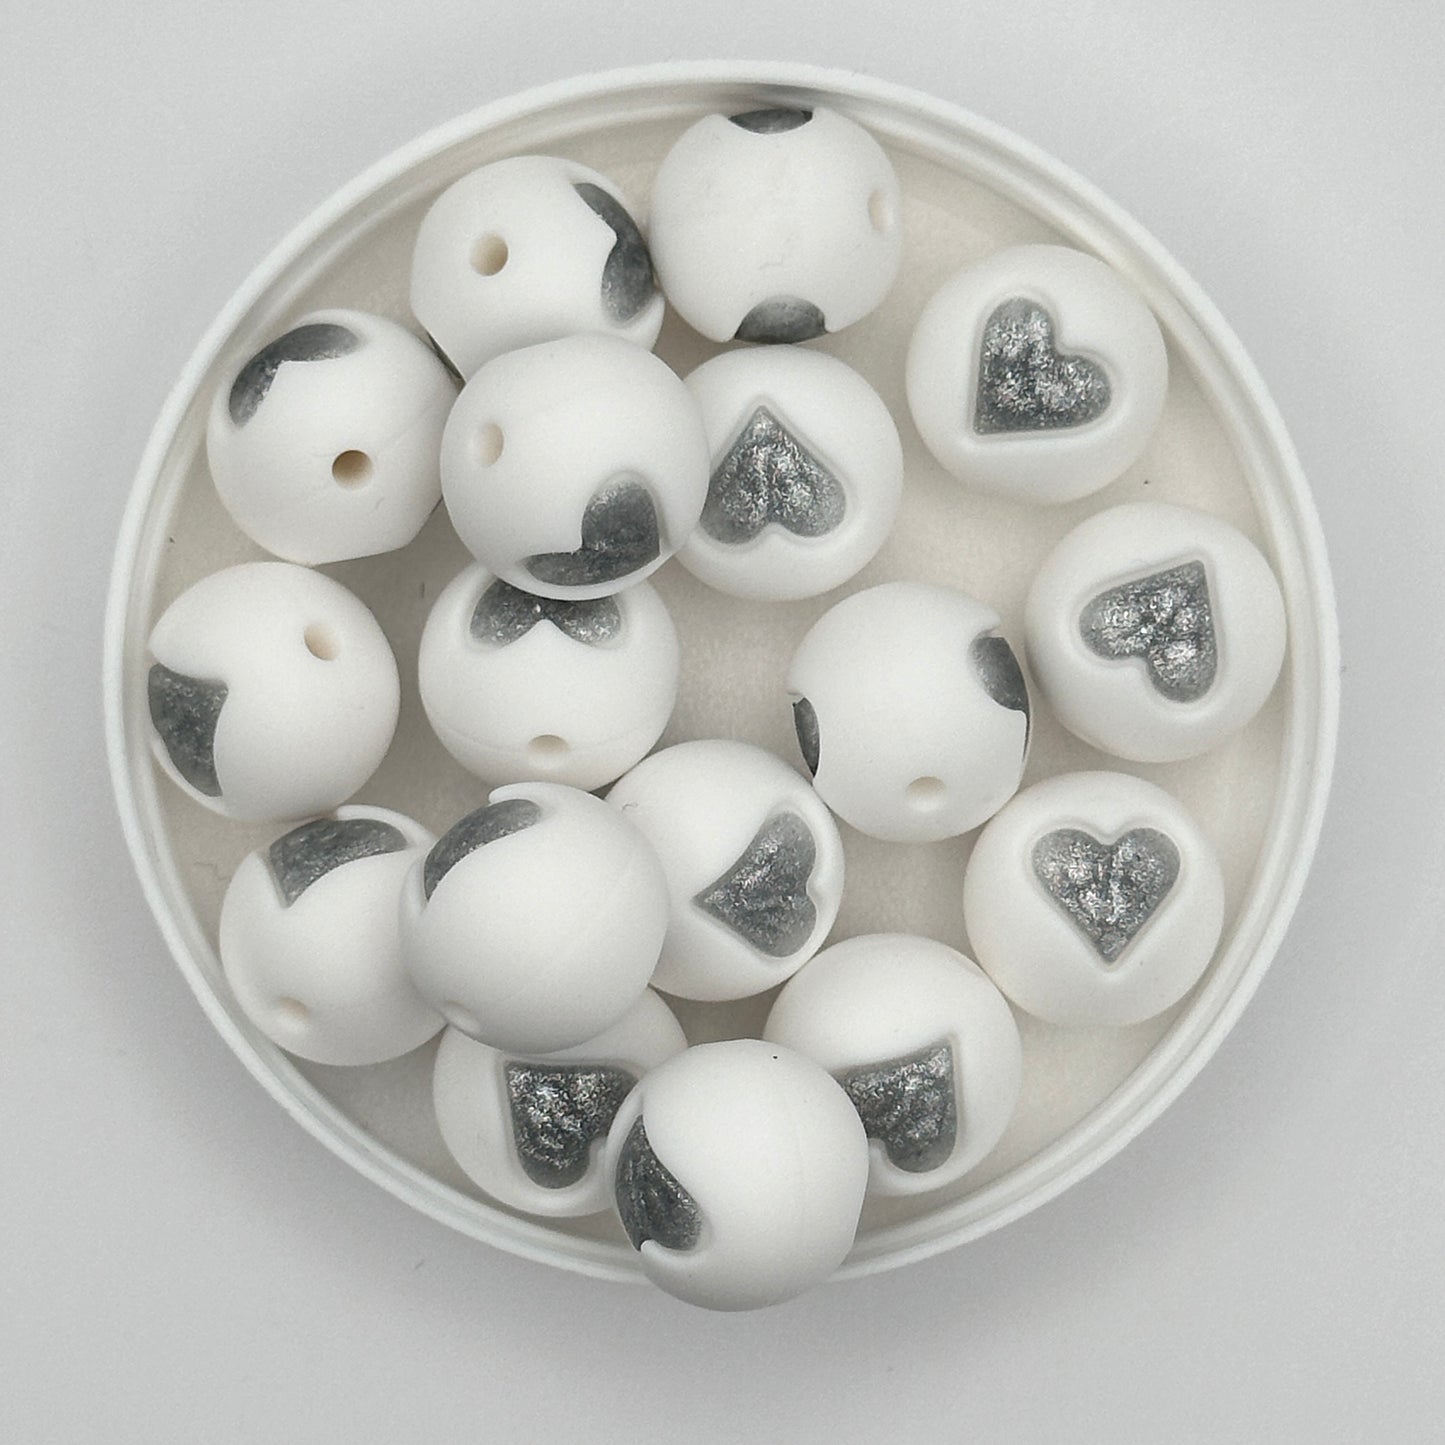 DC Beads: 1/2 Tray Heart Silicone Beads